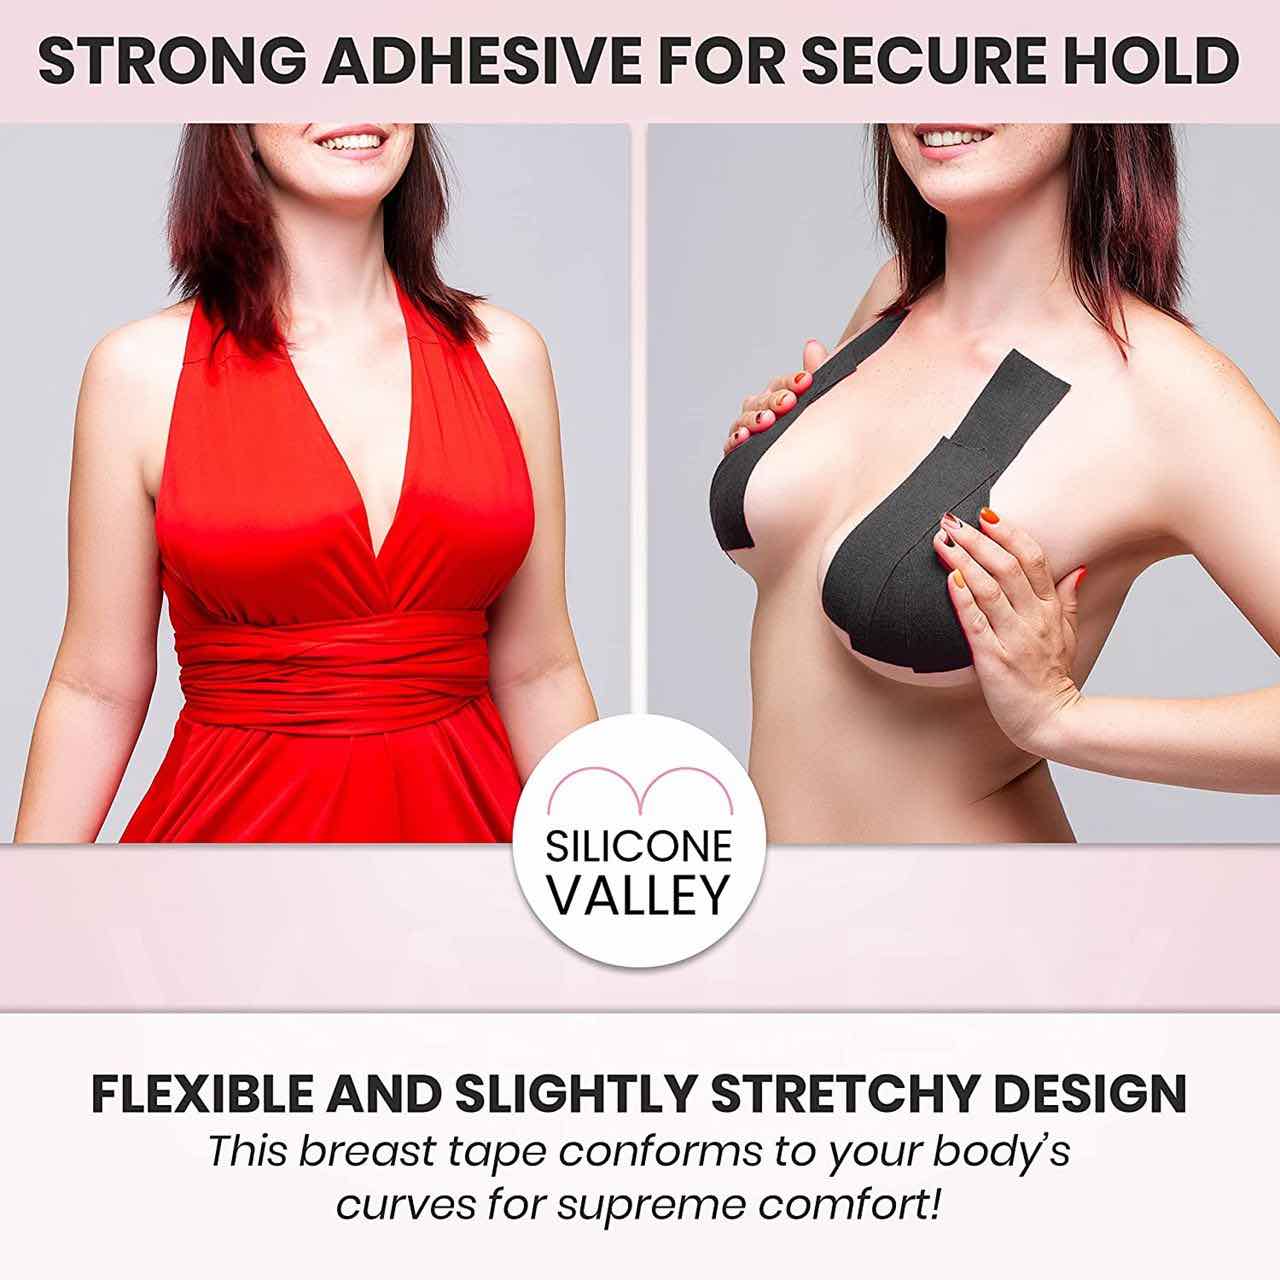 How to use breast lift tape?  Breast tape lift, Breast lift, No bra outfits